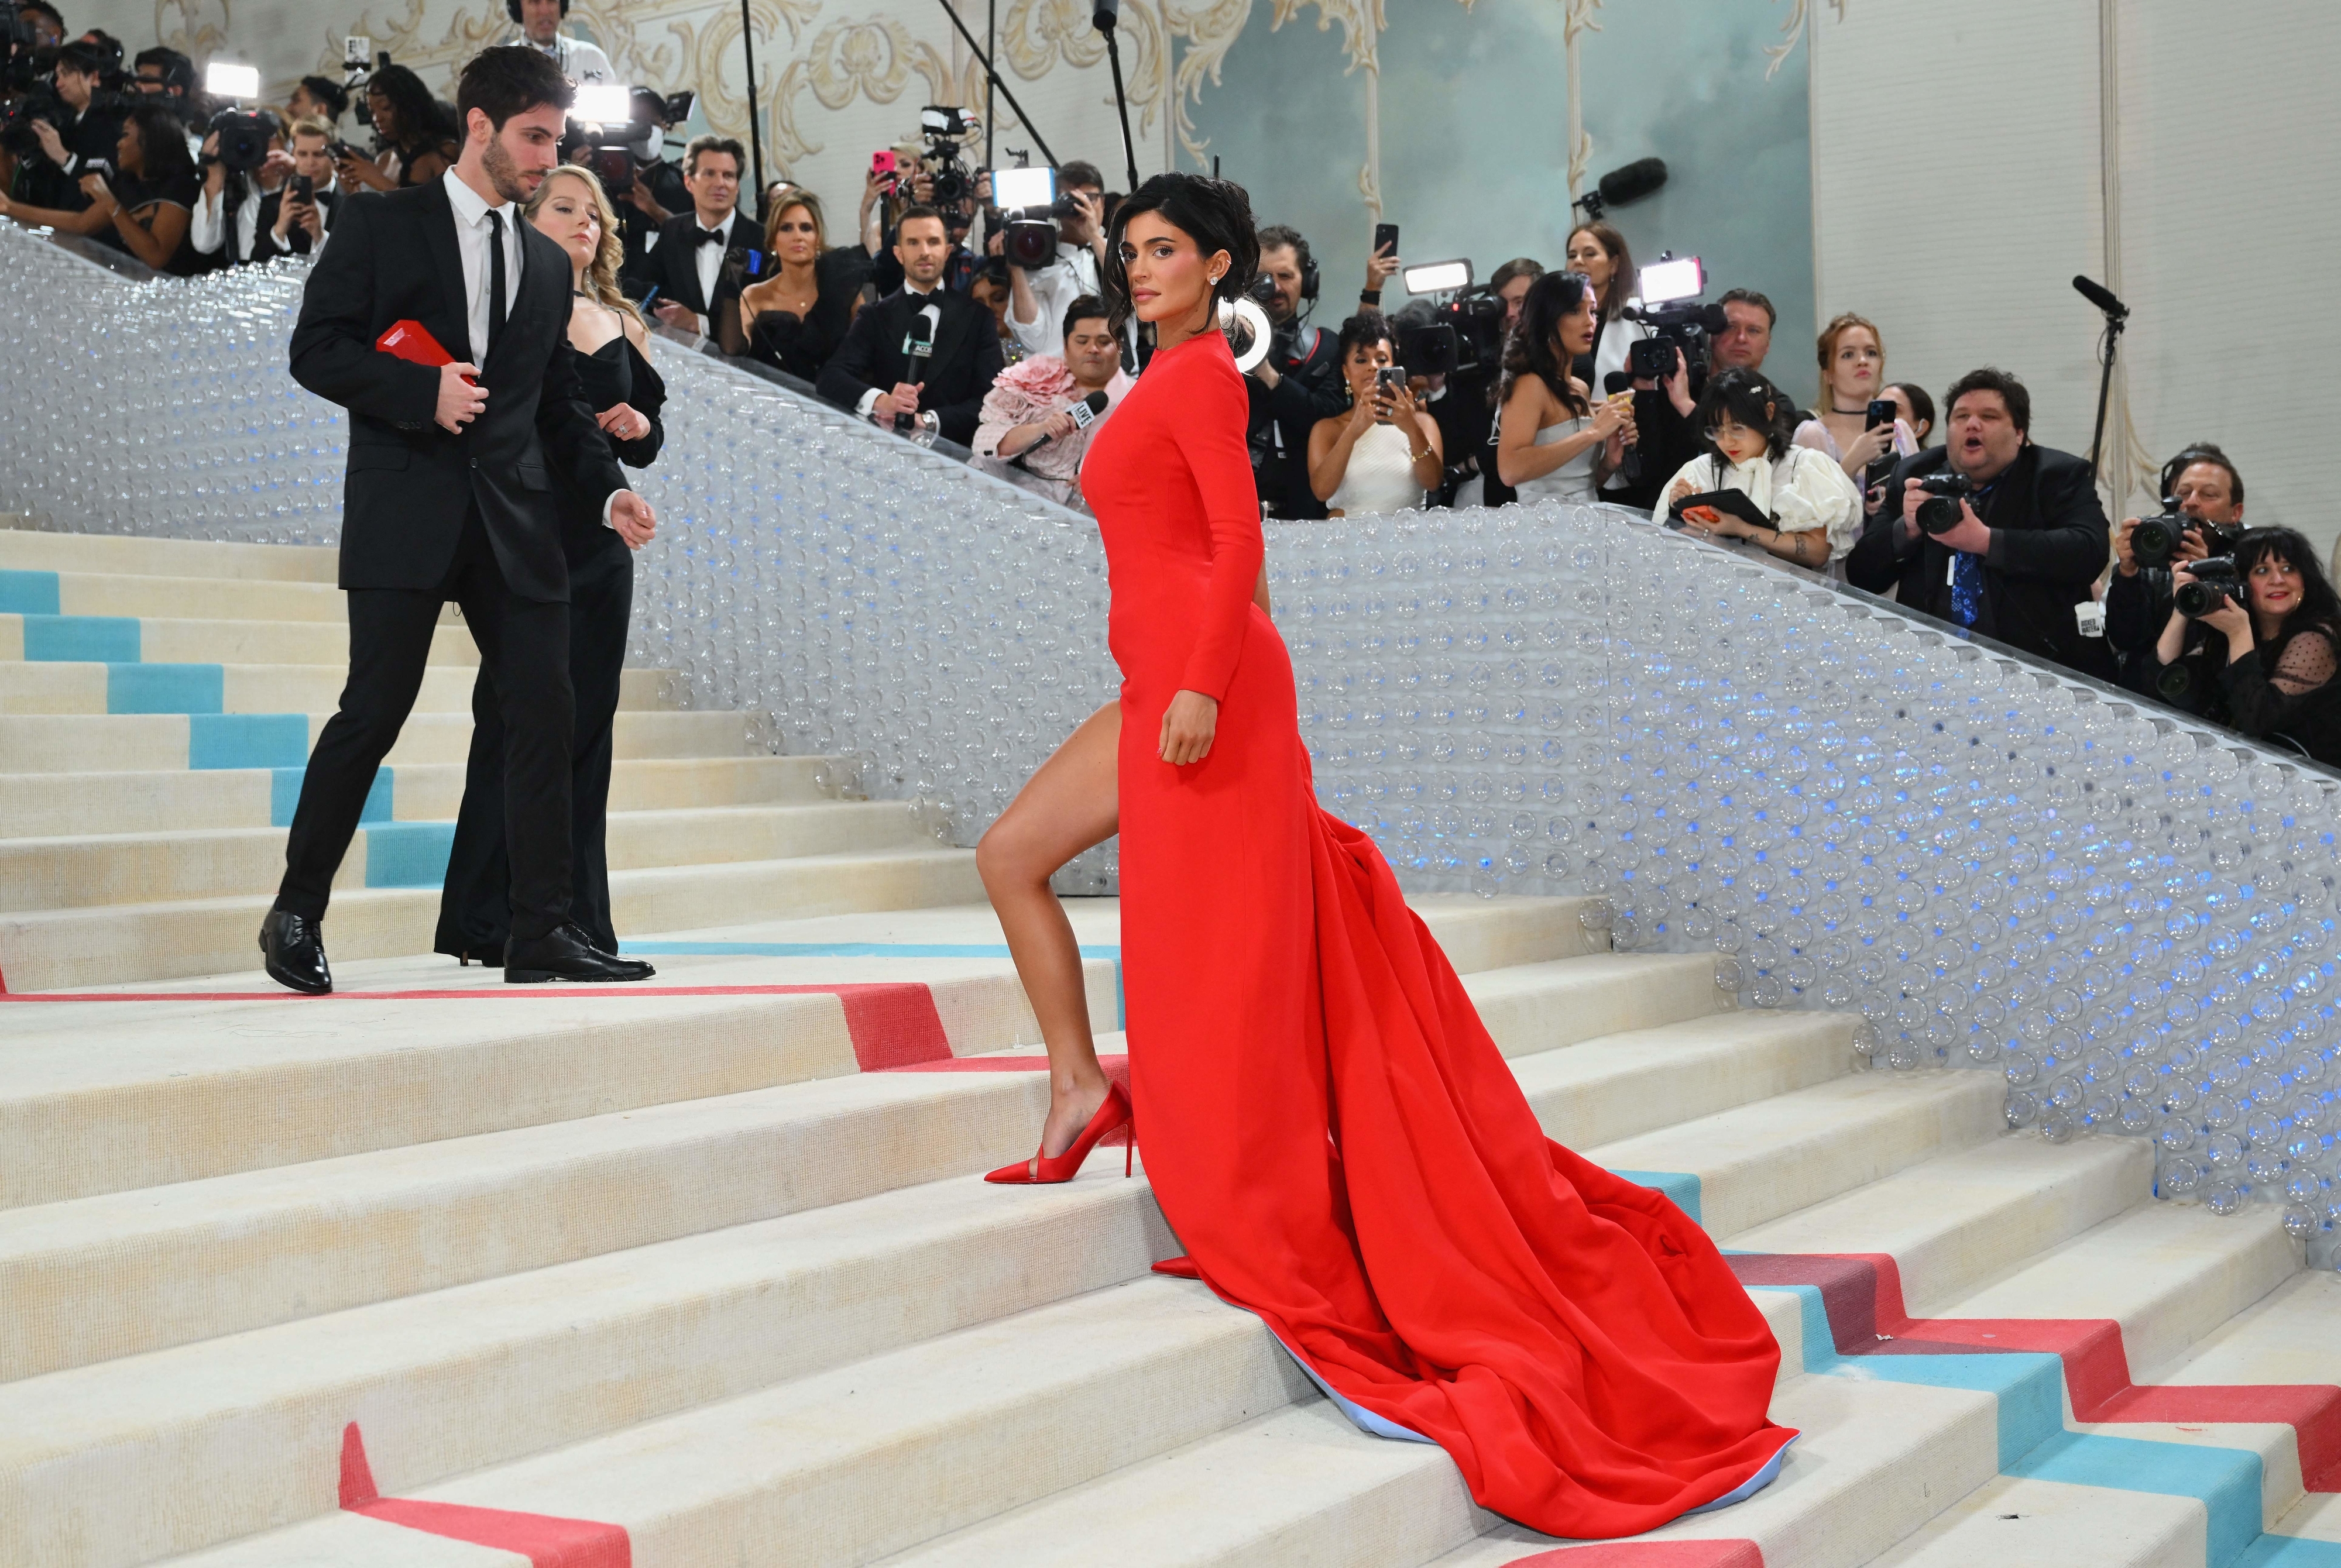 Eugenio and Kylie Jenner on the Met Gala steps